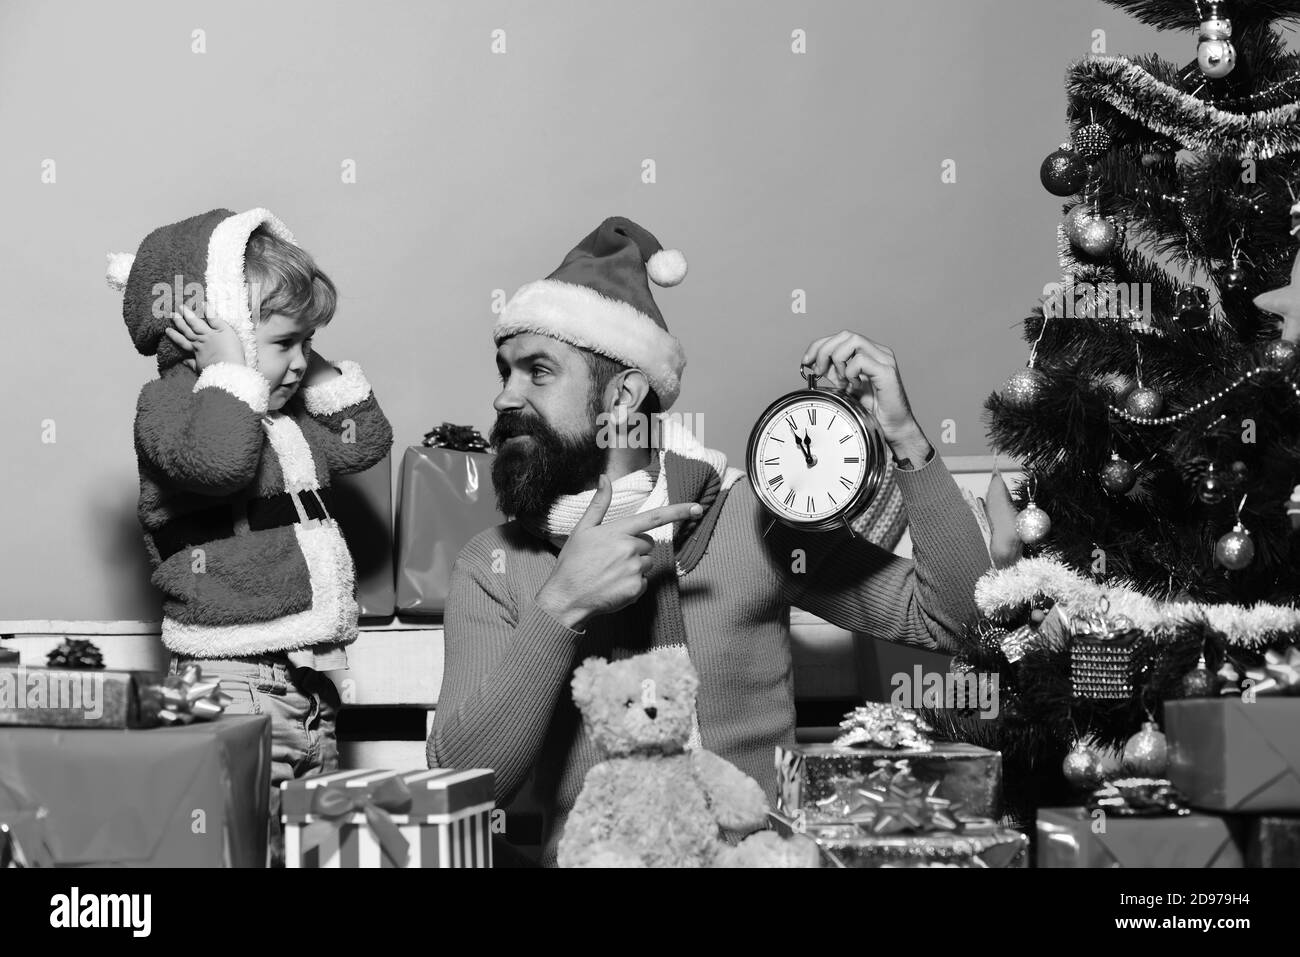 Holiday and countdown concept. Santa and little assistant close ears and point at ringing alarm clock. Christmas family waits for New Year on blue background. Boy and man with beard and serious faces Stock Photo